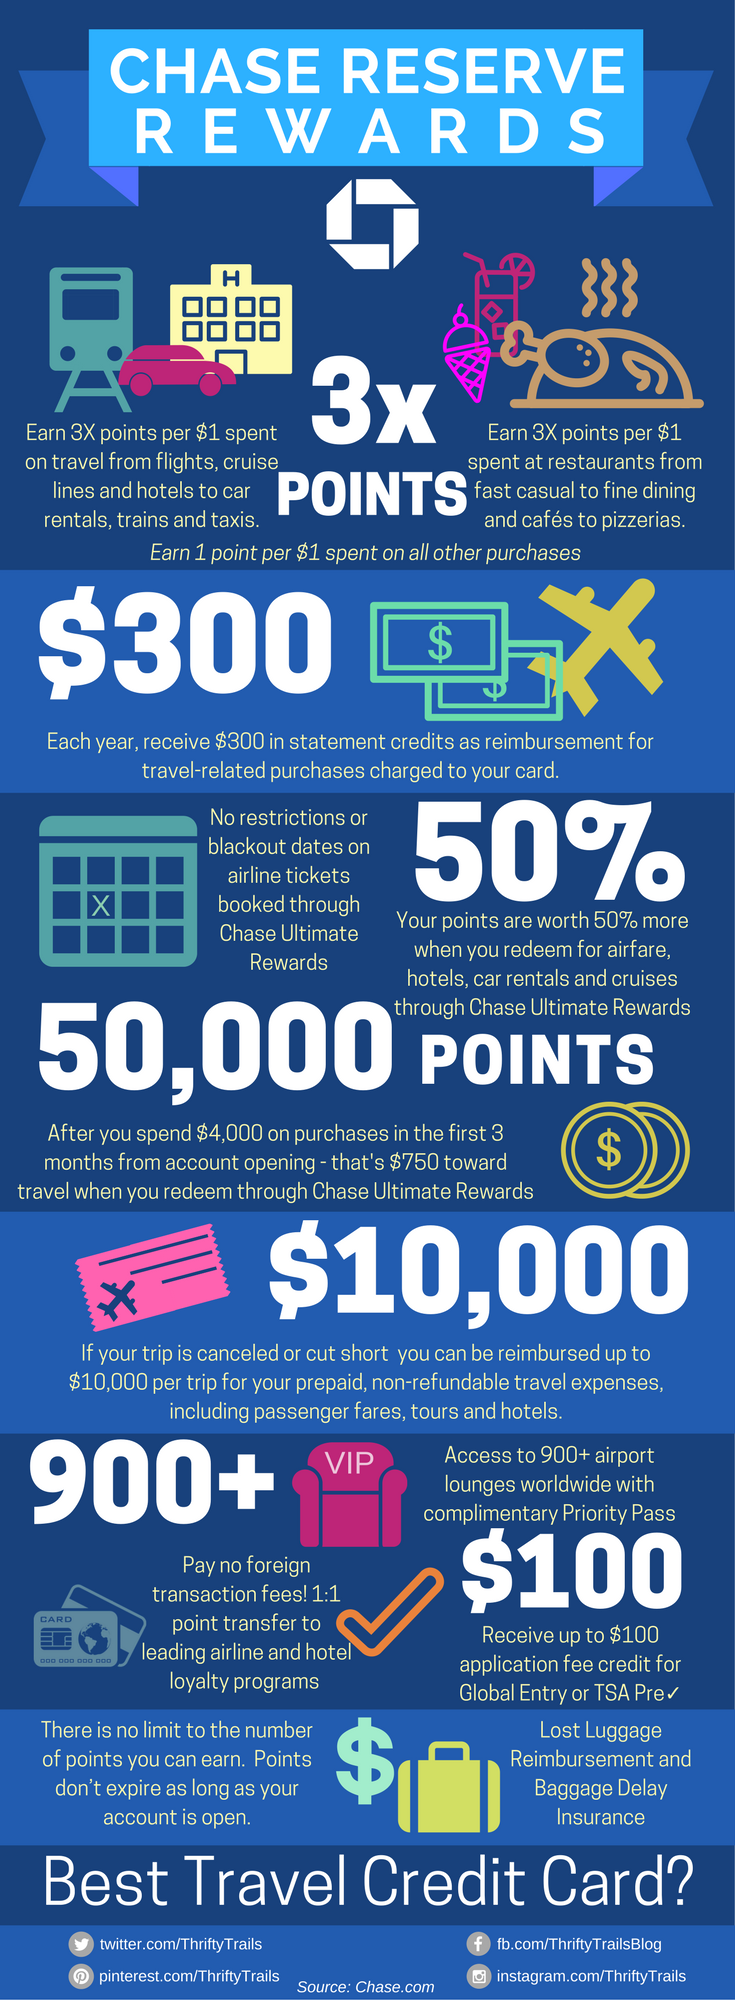 Chase Sapphire Reserve: Best Travel Credit Card Infographic